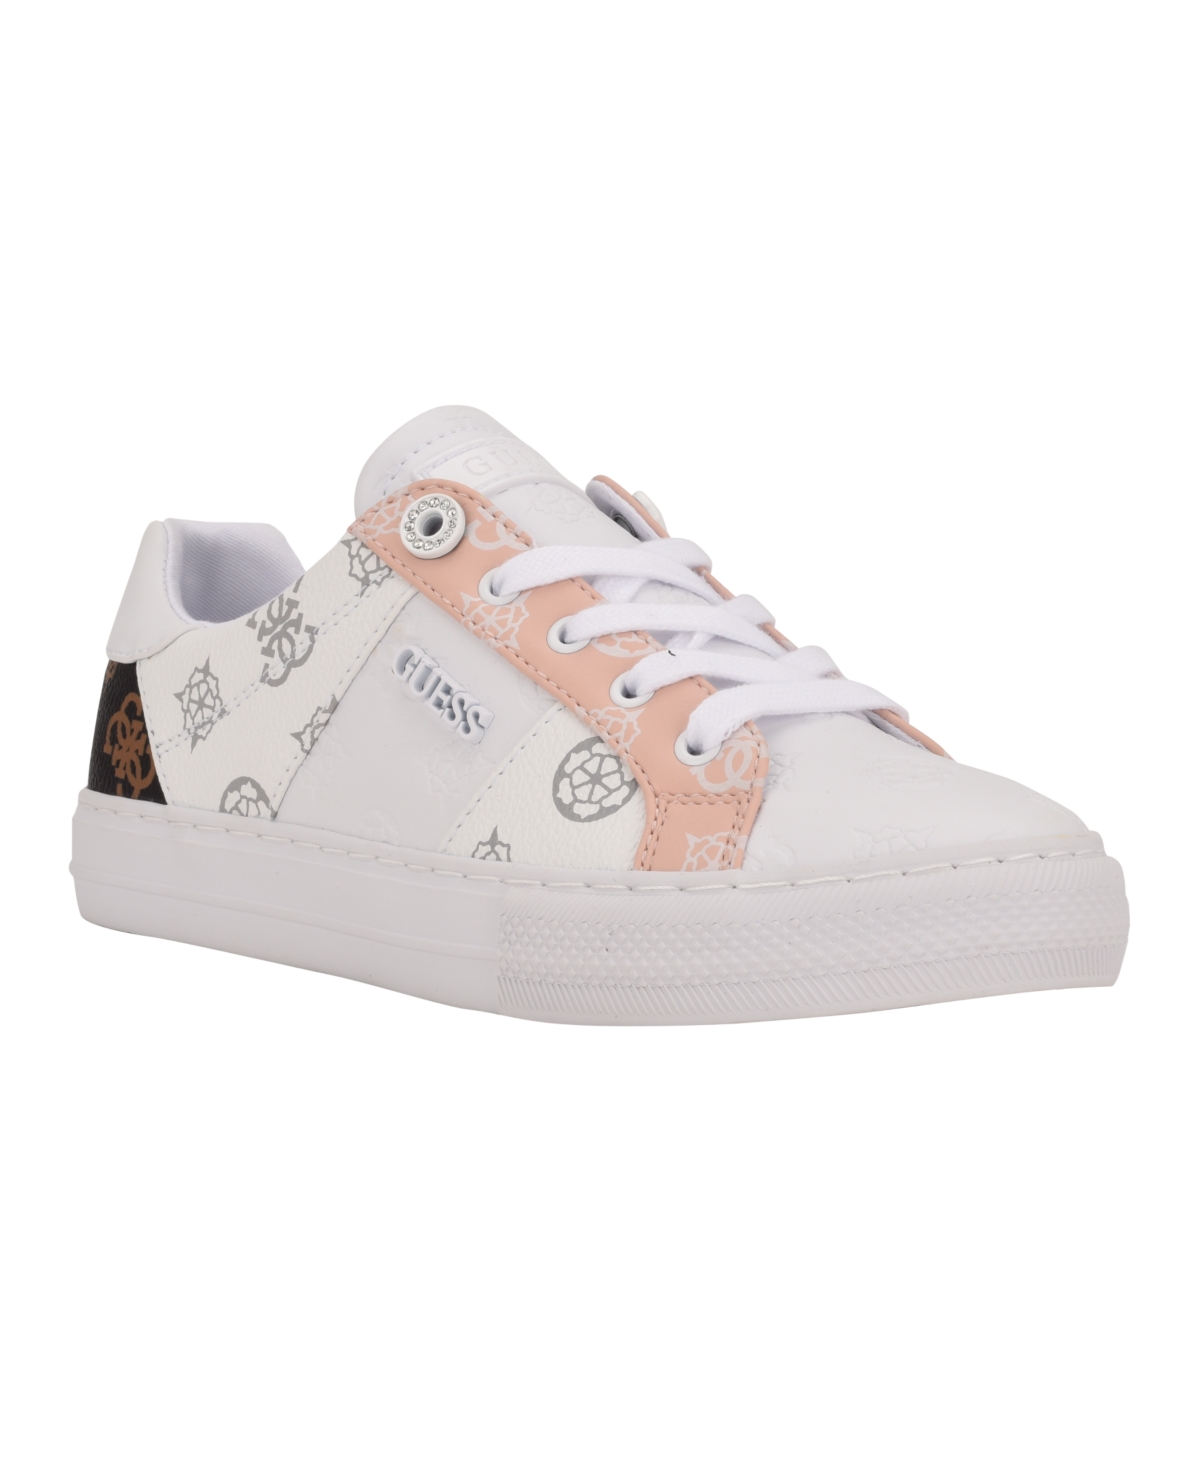 GUESS WOMEN'S LOVEN CASUAL LACE-UP SNEAKERS